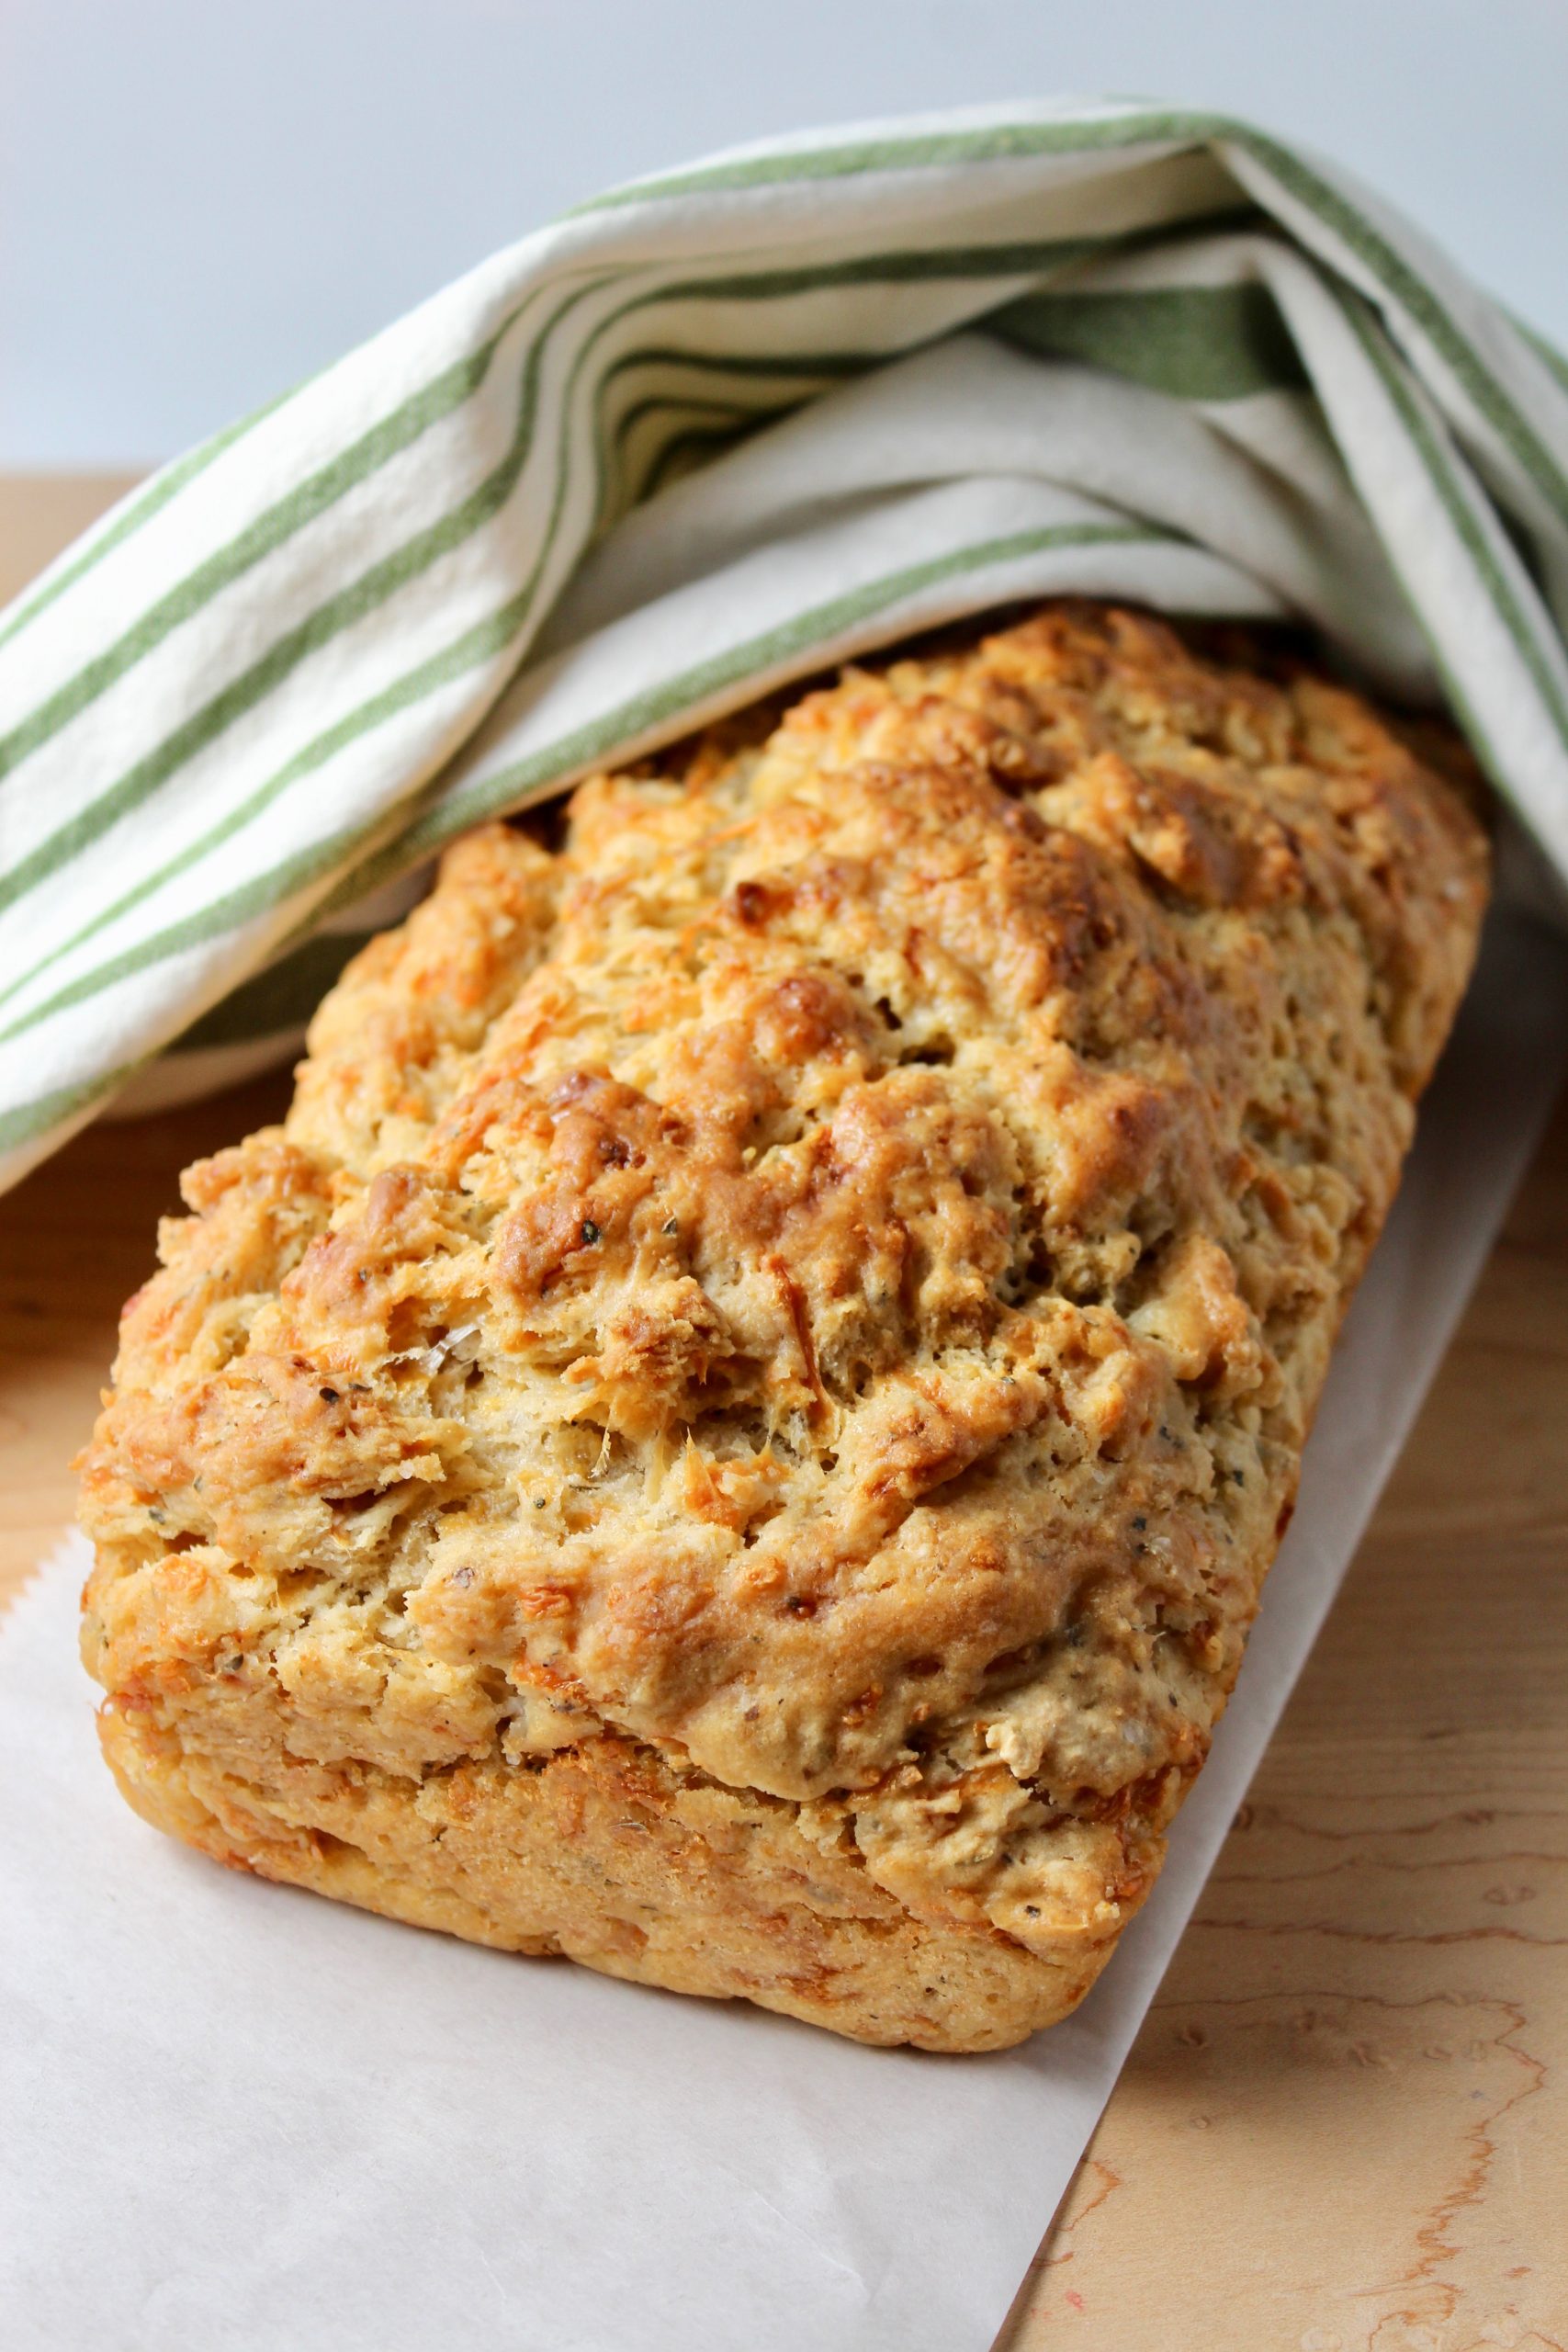 https://www.epicuricloud.com/wp-content/uploads/2020/03/Cheesy-Herb-Beer-Bread-Portrait-scaled.jpg